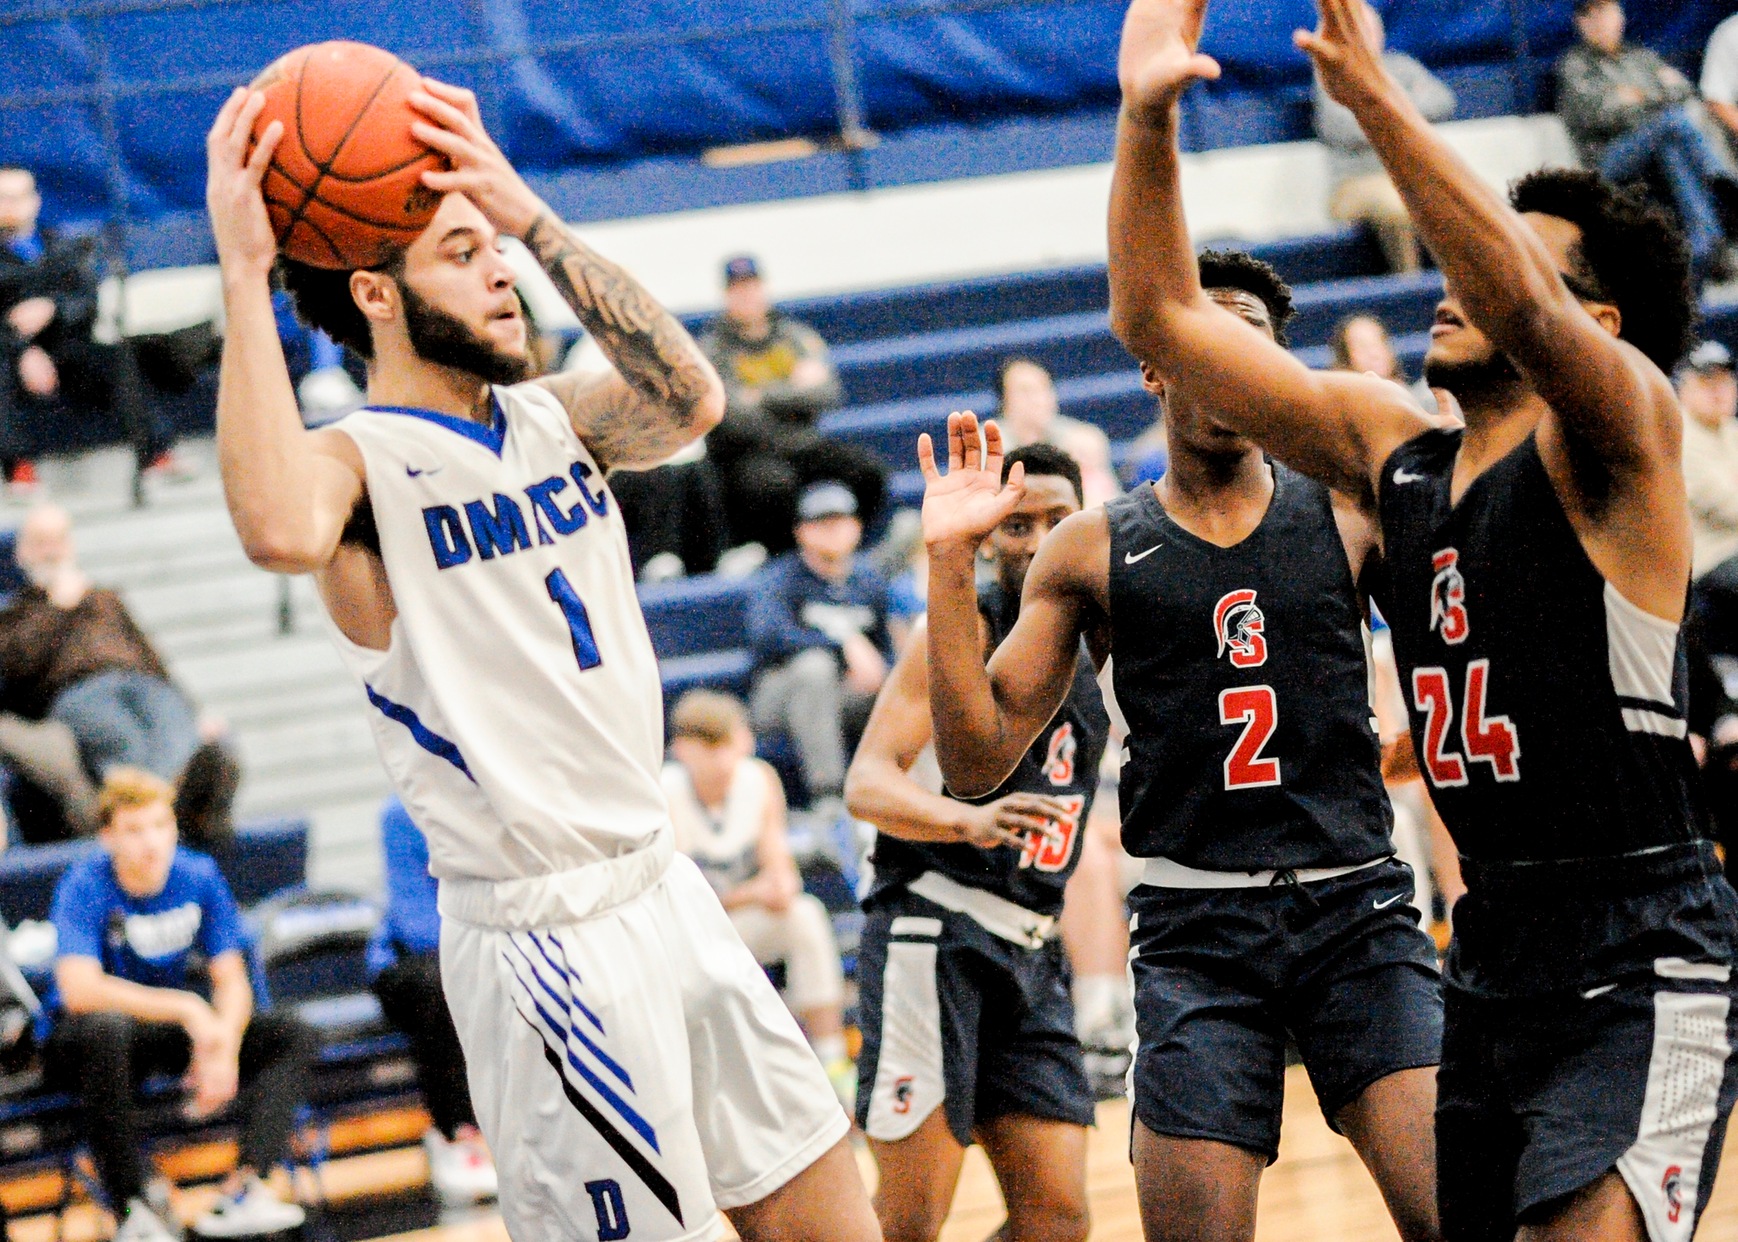 Bariffe-Smith leads DMACC men's basketball team past SWCC, 86-50